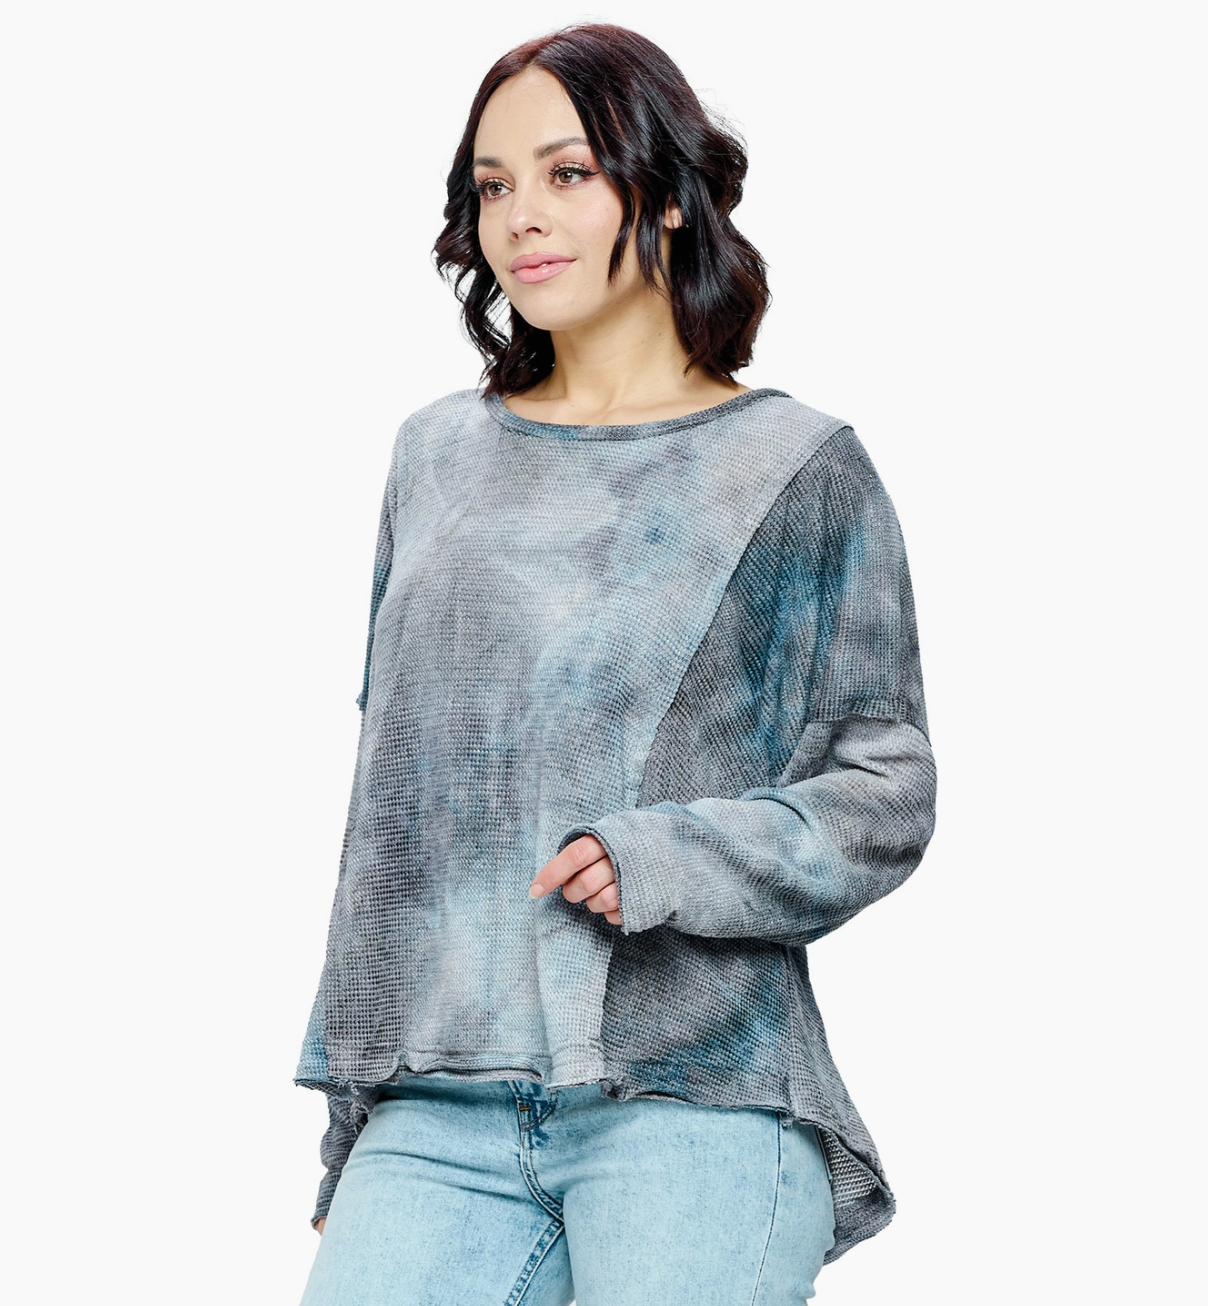 Pullover Tie Dye Loose Fit Sweater